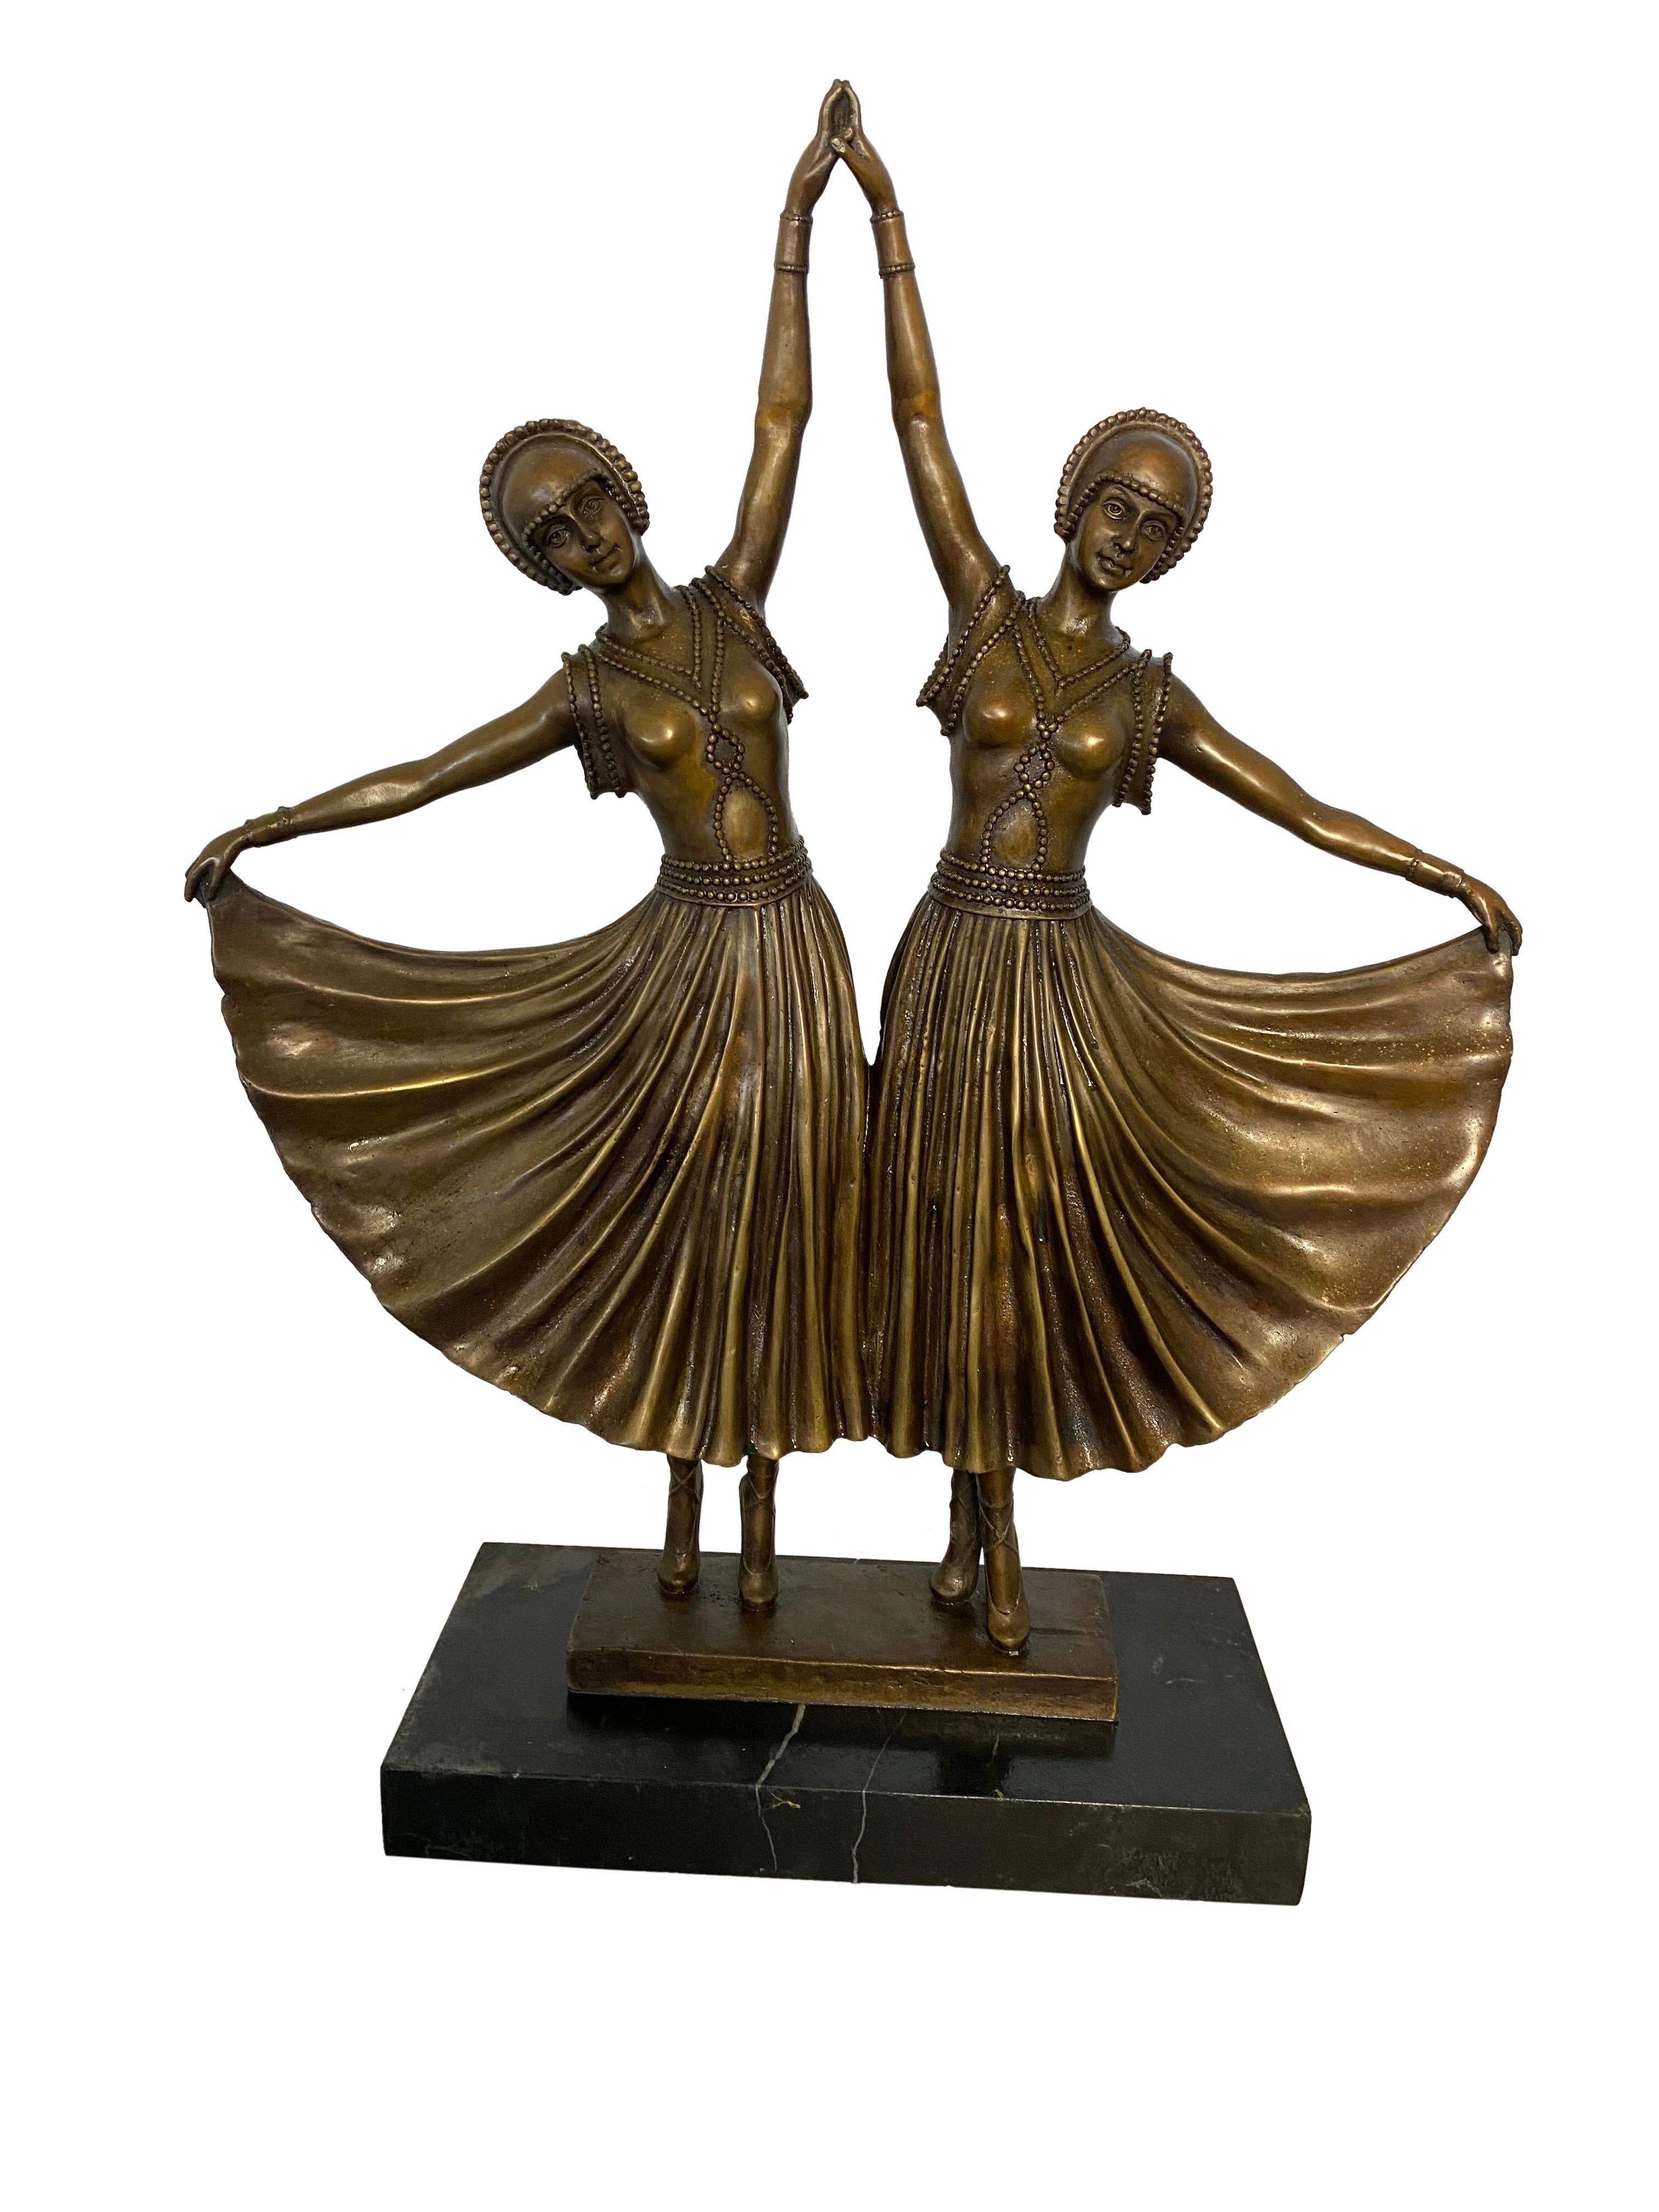 Art Deco style bronze ballerinas, 20th century. Stunning bronze ballerinas of the romantic period wearing embroidered clothing and fanned dresses. Lovely patina throughout. 

Dimensions (cm)
H60/W50/D16.